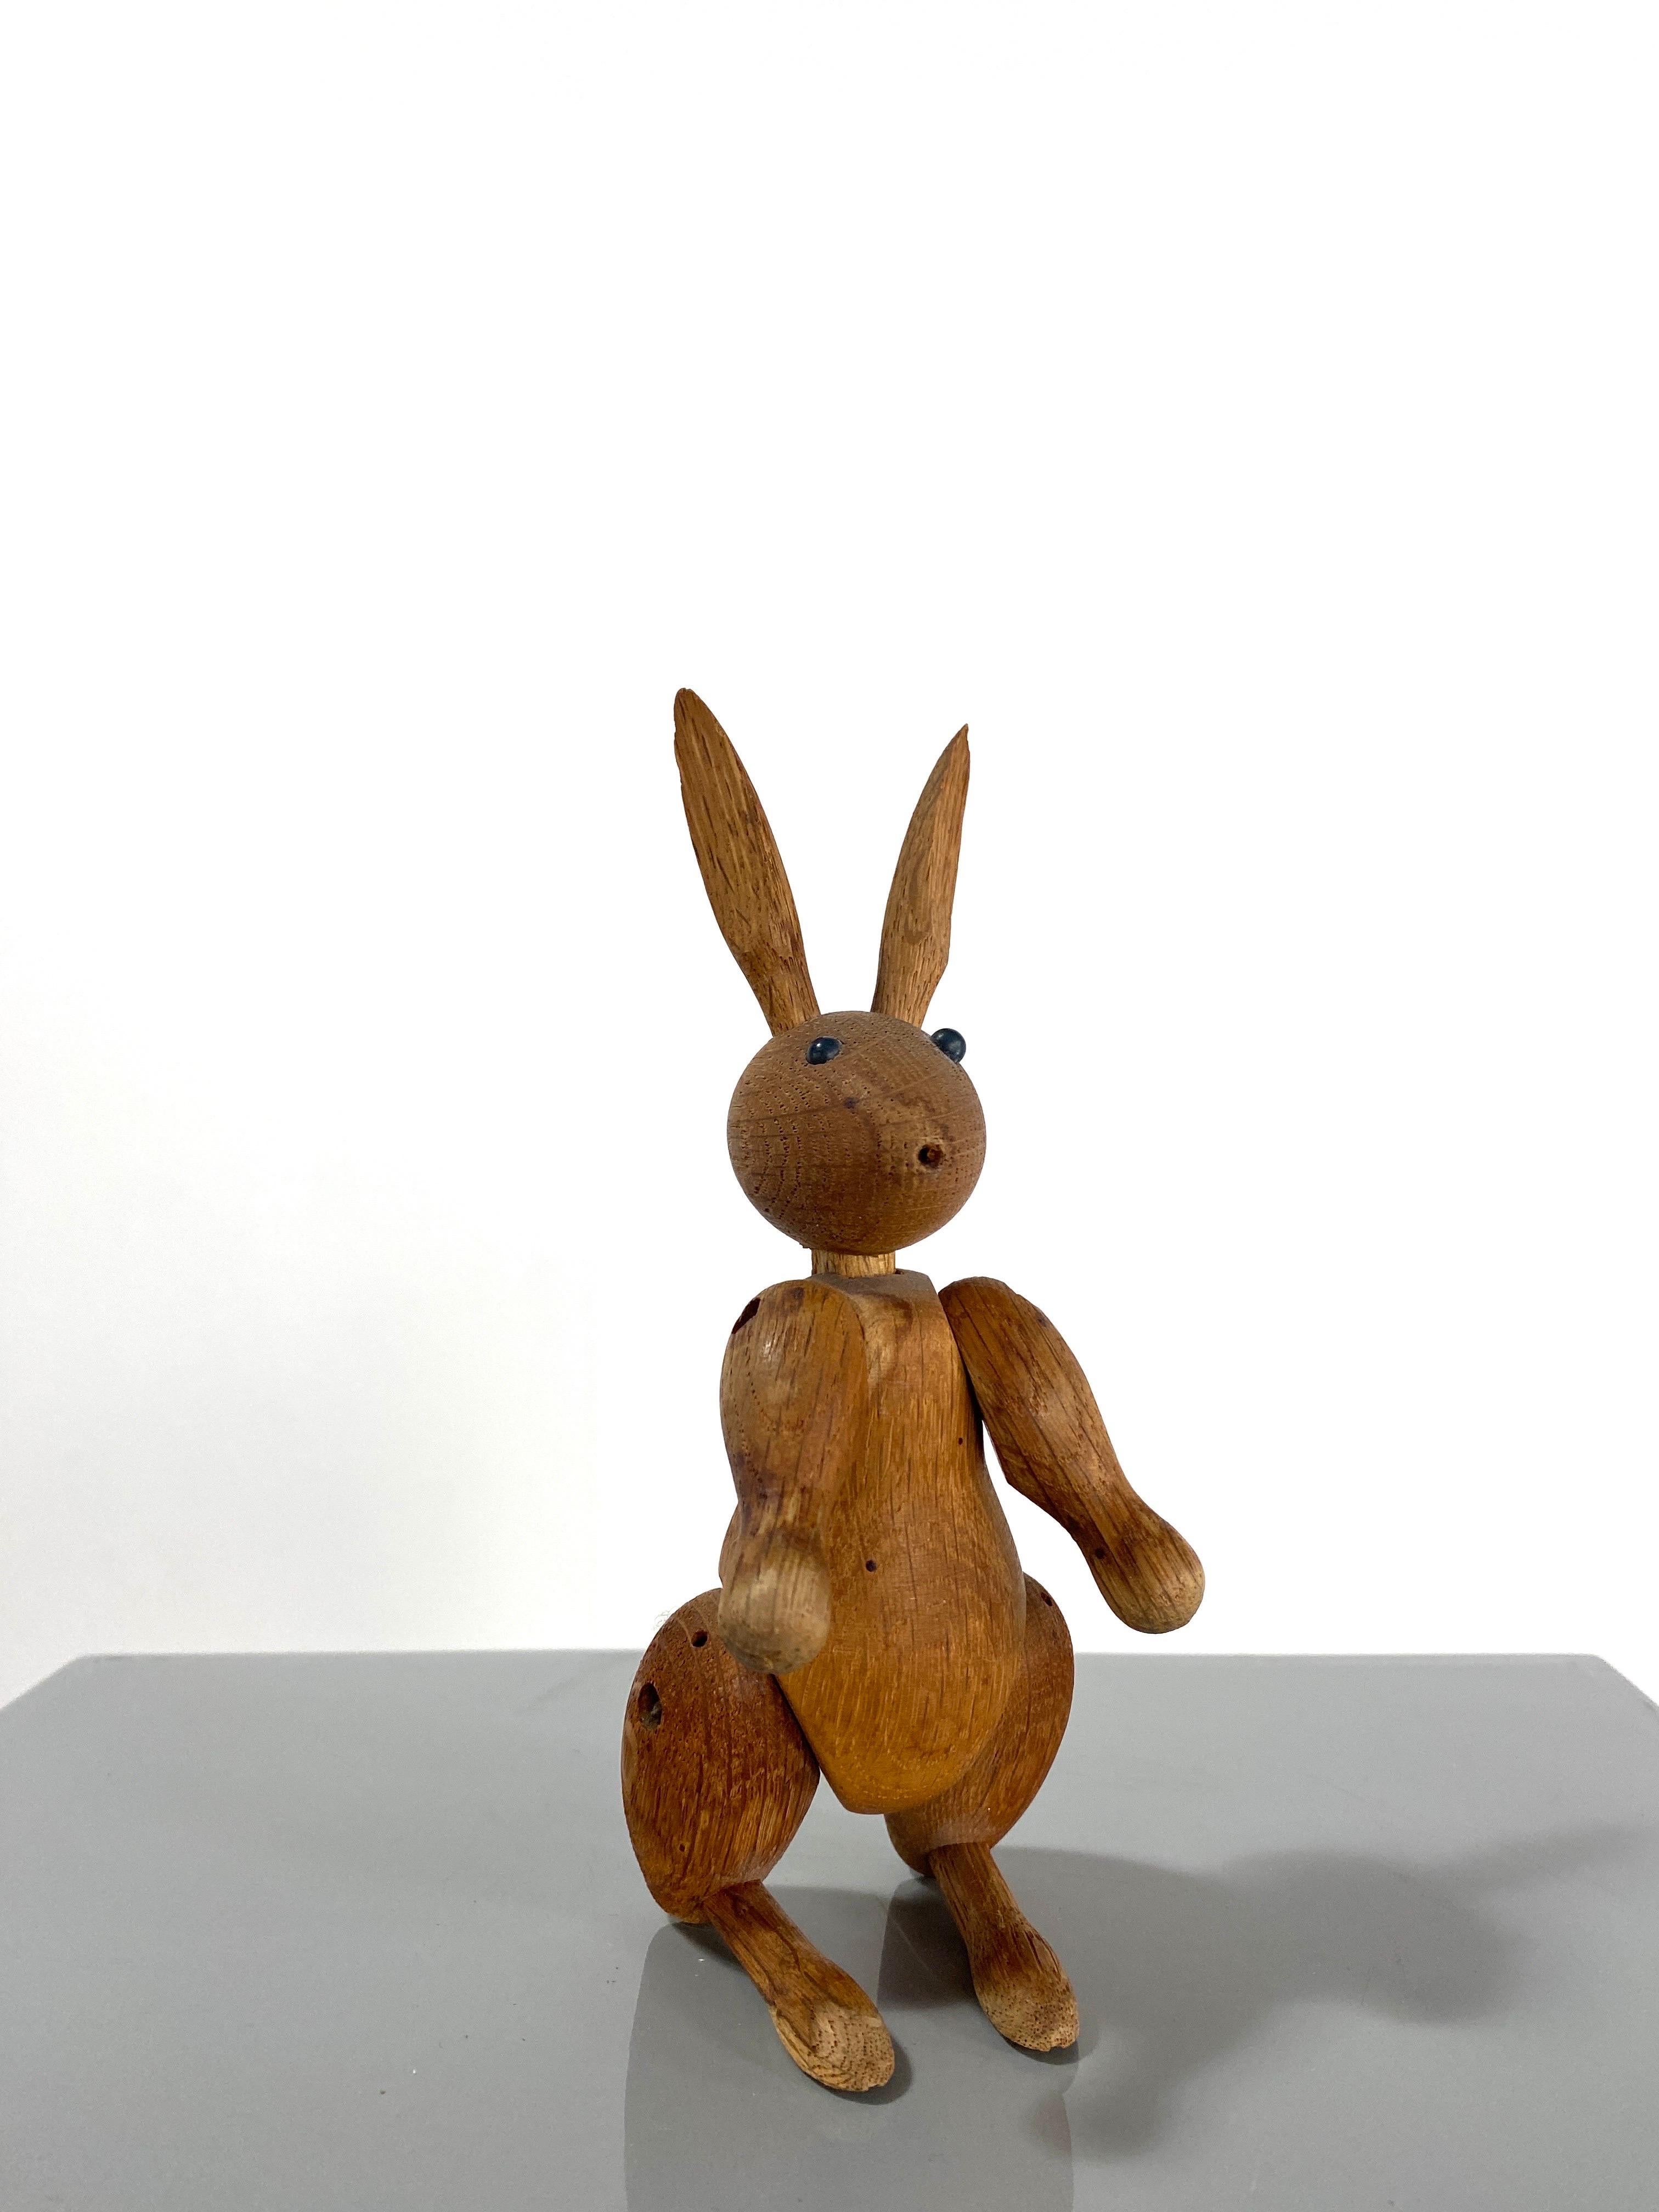 Mid-20th Century Vintage Rabbit Figurine by Kay Bojesen, It Was Designed in 1957, This is an Exam